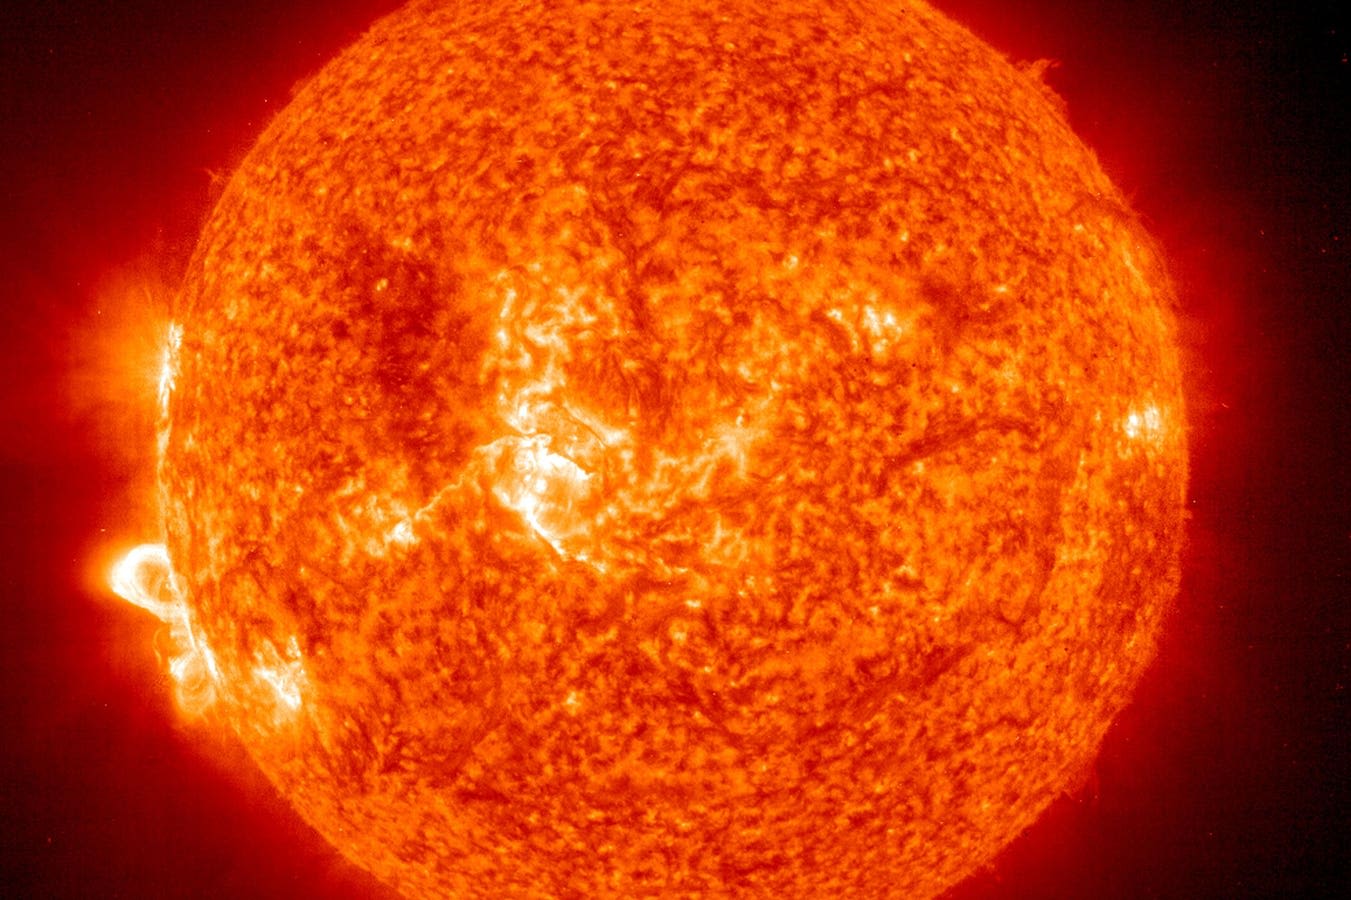 Massive New Solar Flare Could Disrupt Communications, Scientists Warn—But Widespread Northern Lights Are Unlikely